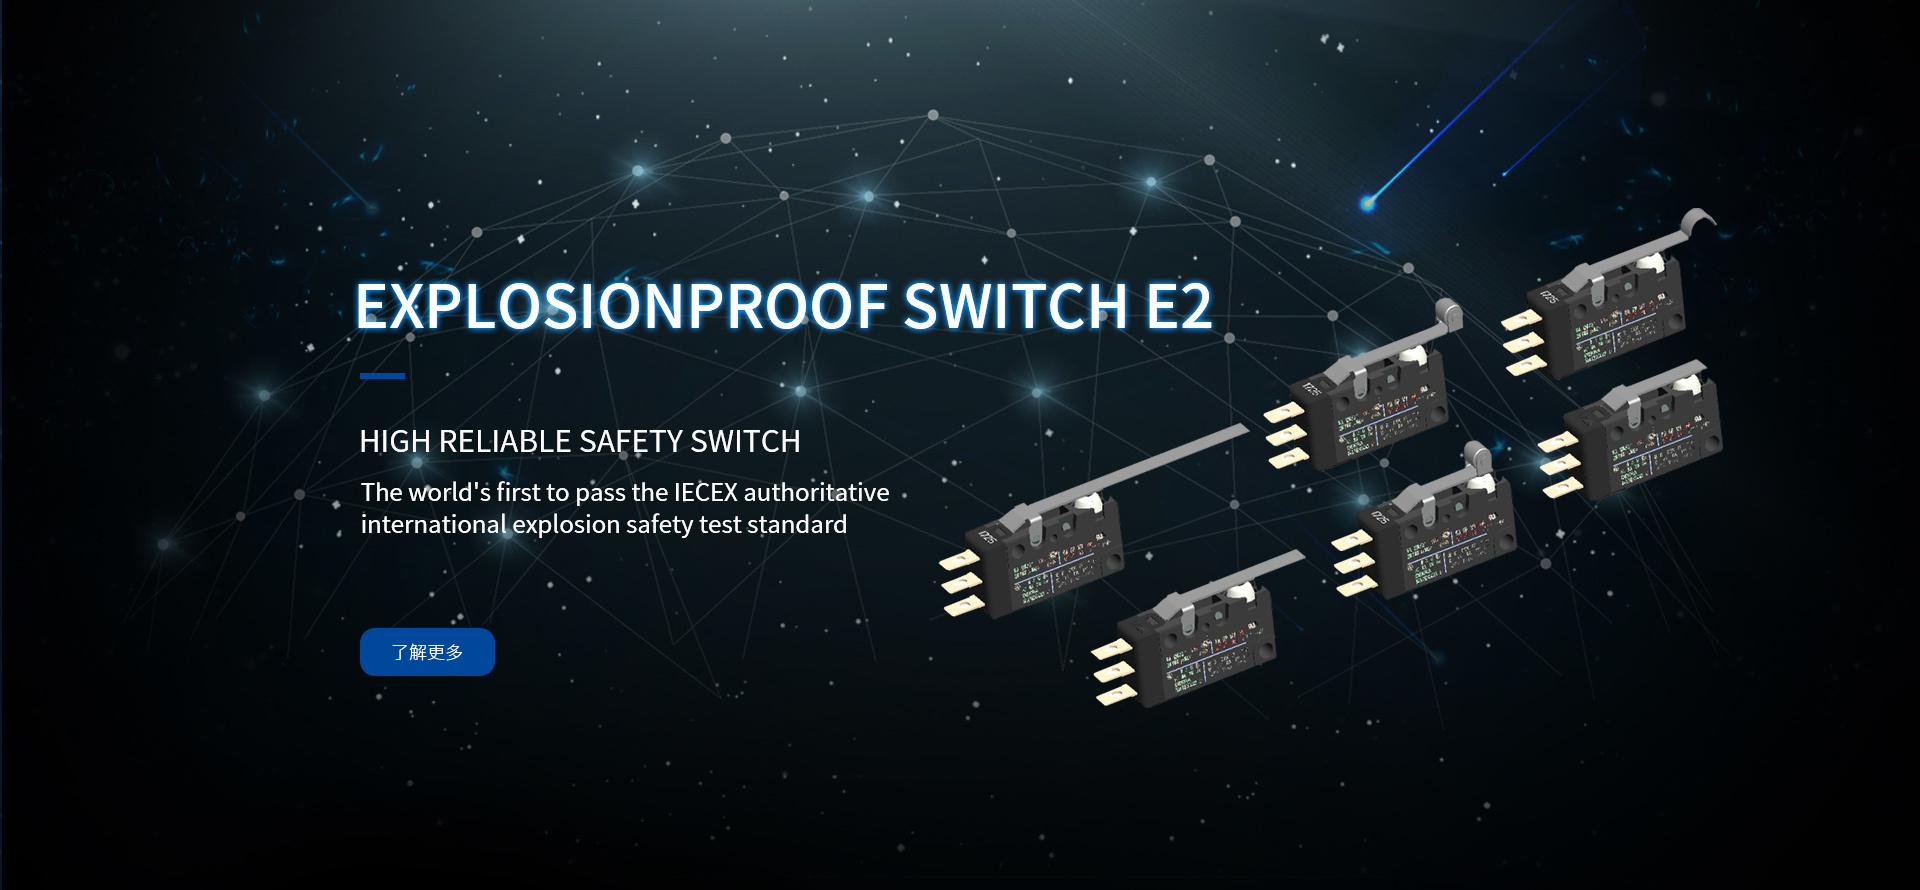 EXPLOSIONPROOF SWITCH E2